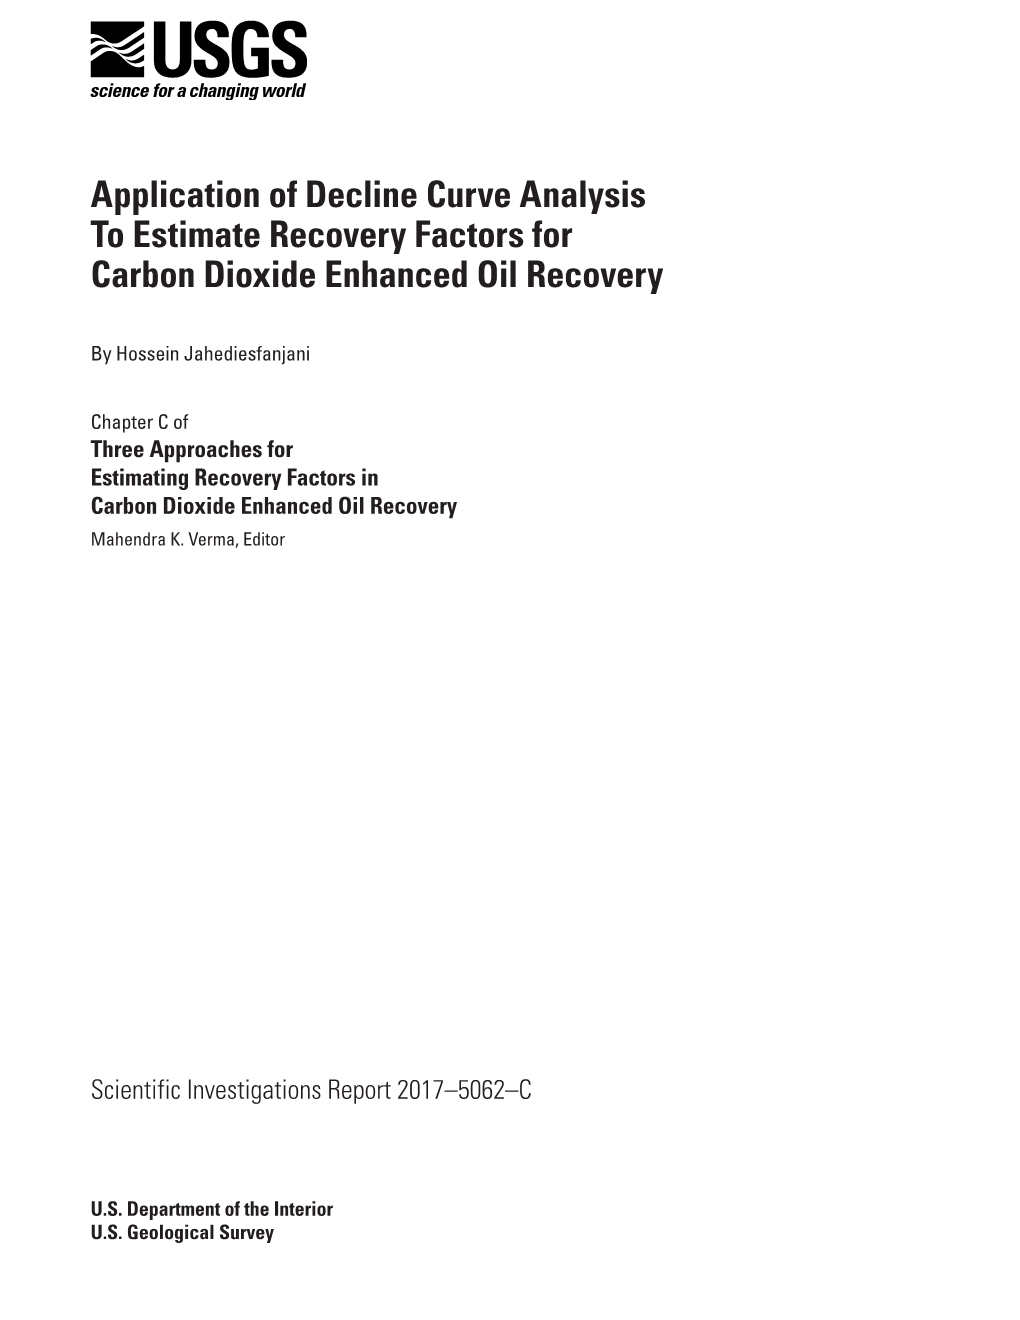 Application of Decline Curve Analysis to Estimate Recovery Factors for Carbon Dioxide Enhanced Oil Recovery